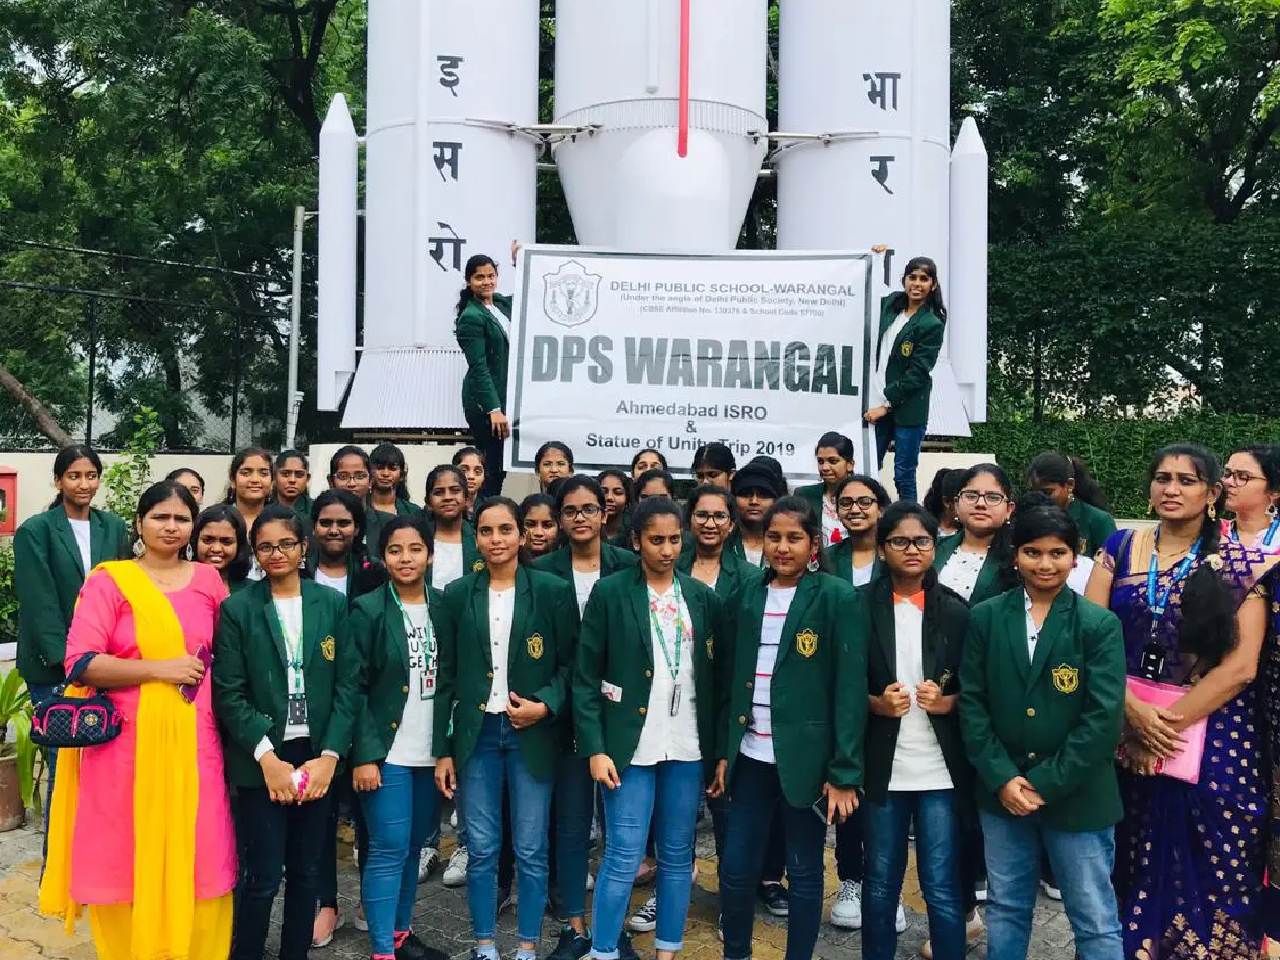 Students along with teacher clicking group picture in front of ISRO Space project